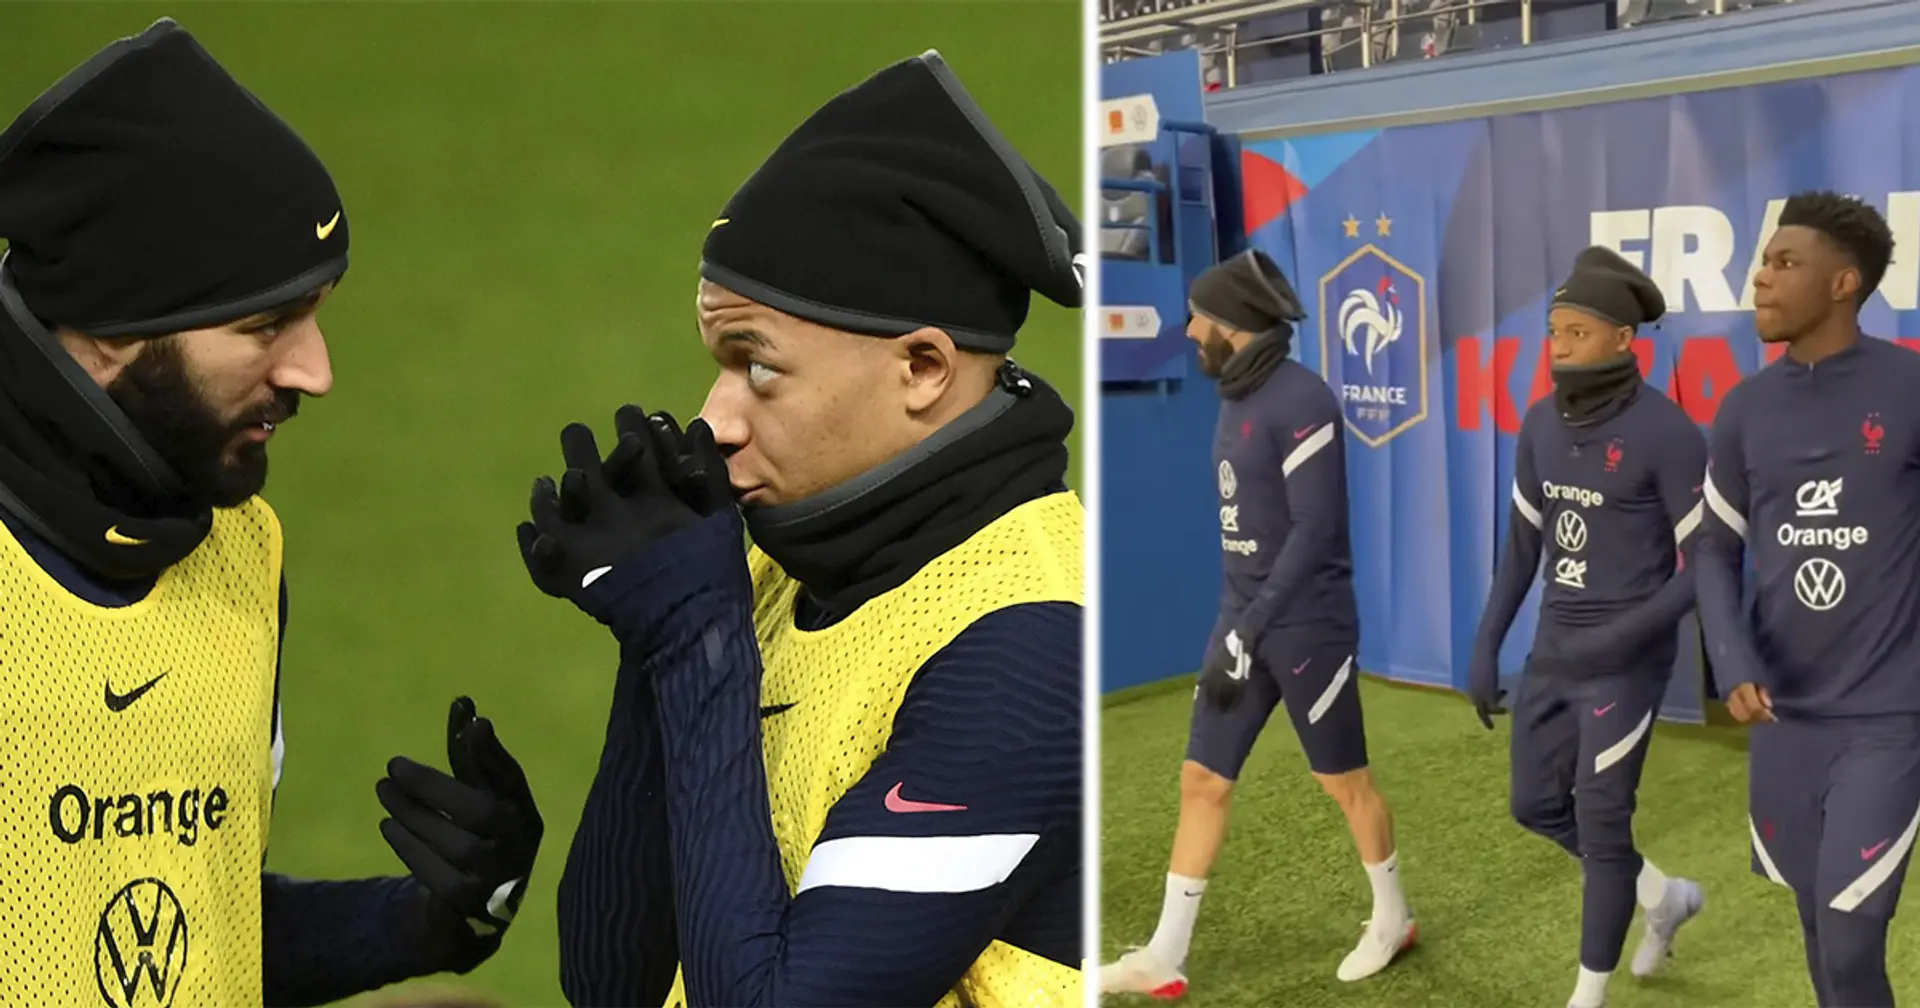 'He's telling him how to escape PSG': Fresh Mbappe-Benzema pics go viral